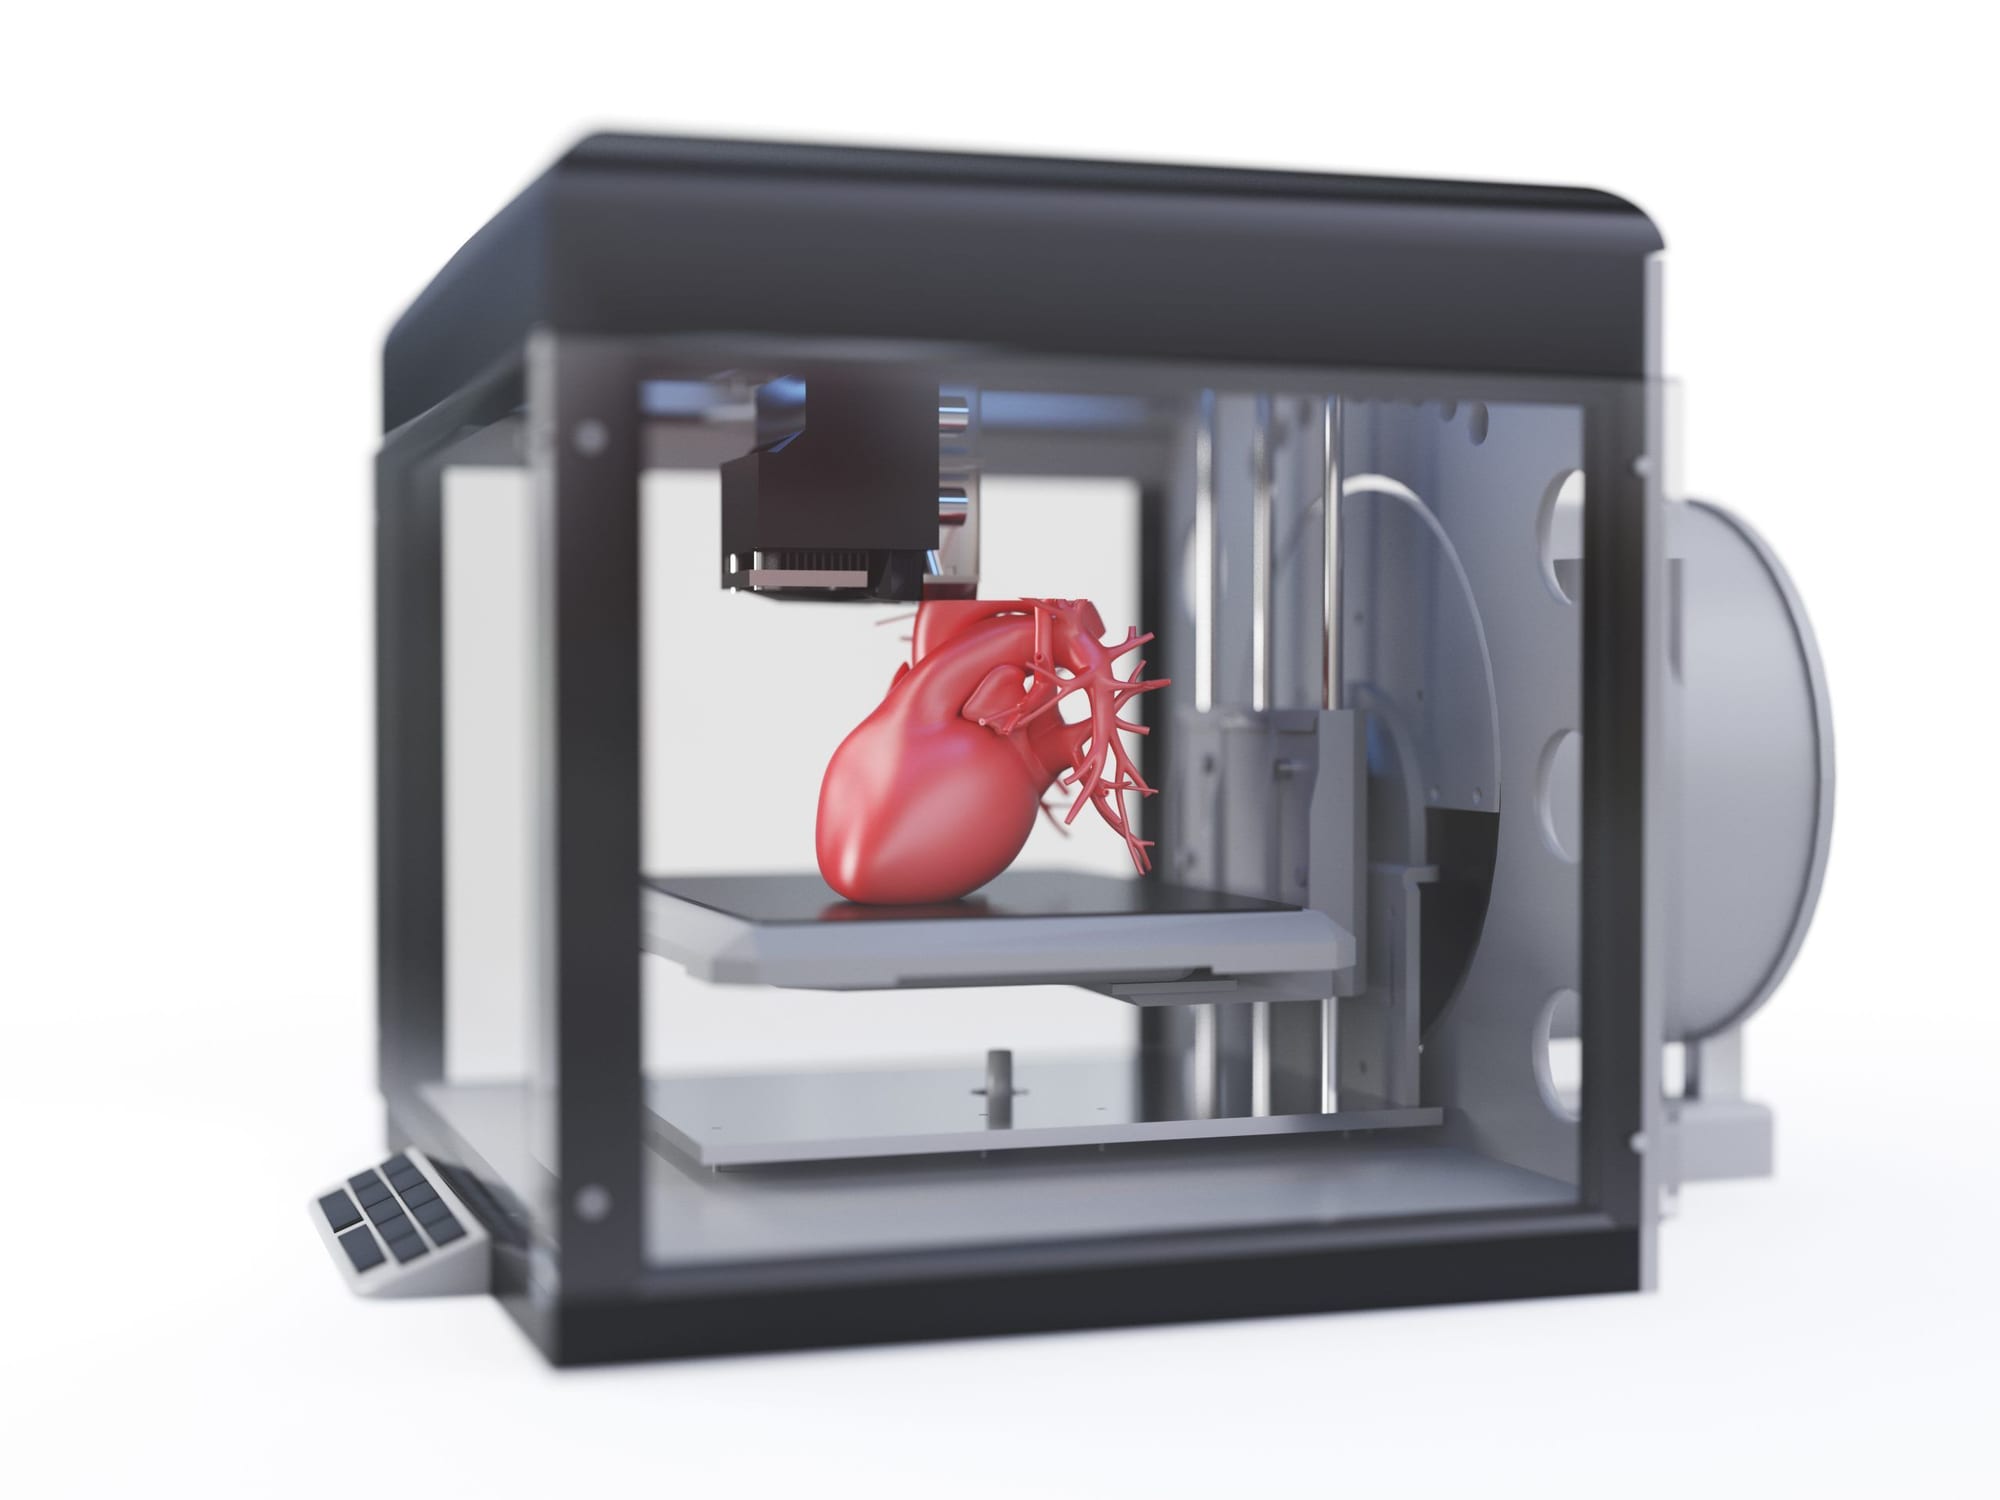 Graphic shows a human heart being created in a 4D printer. 